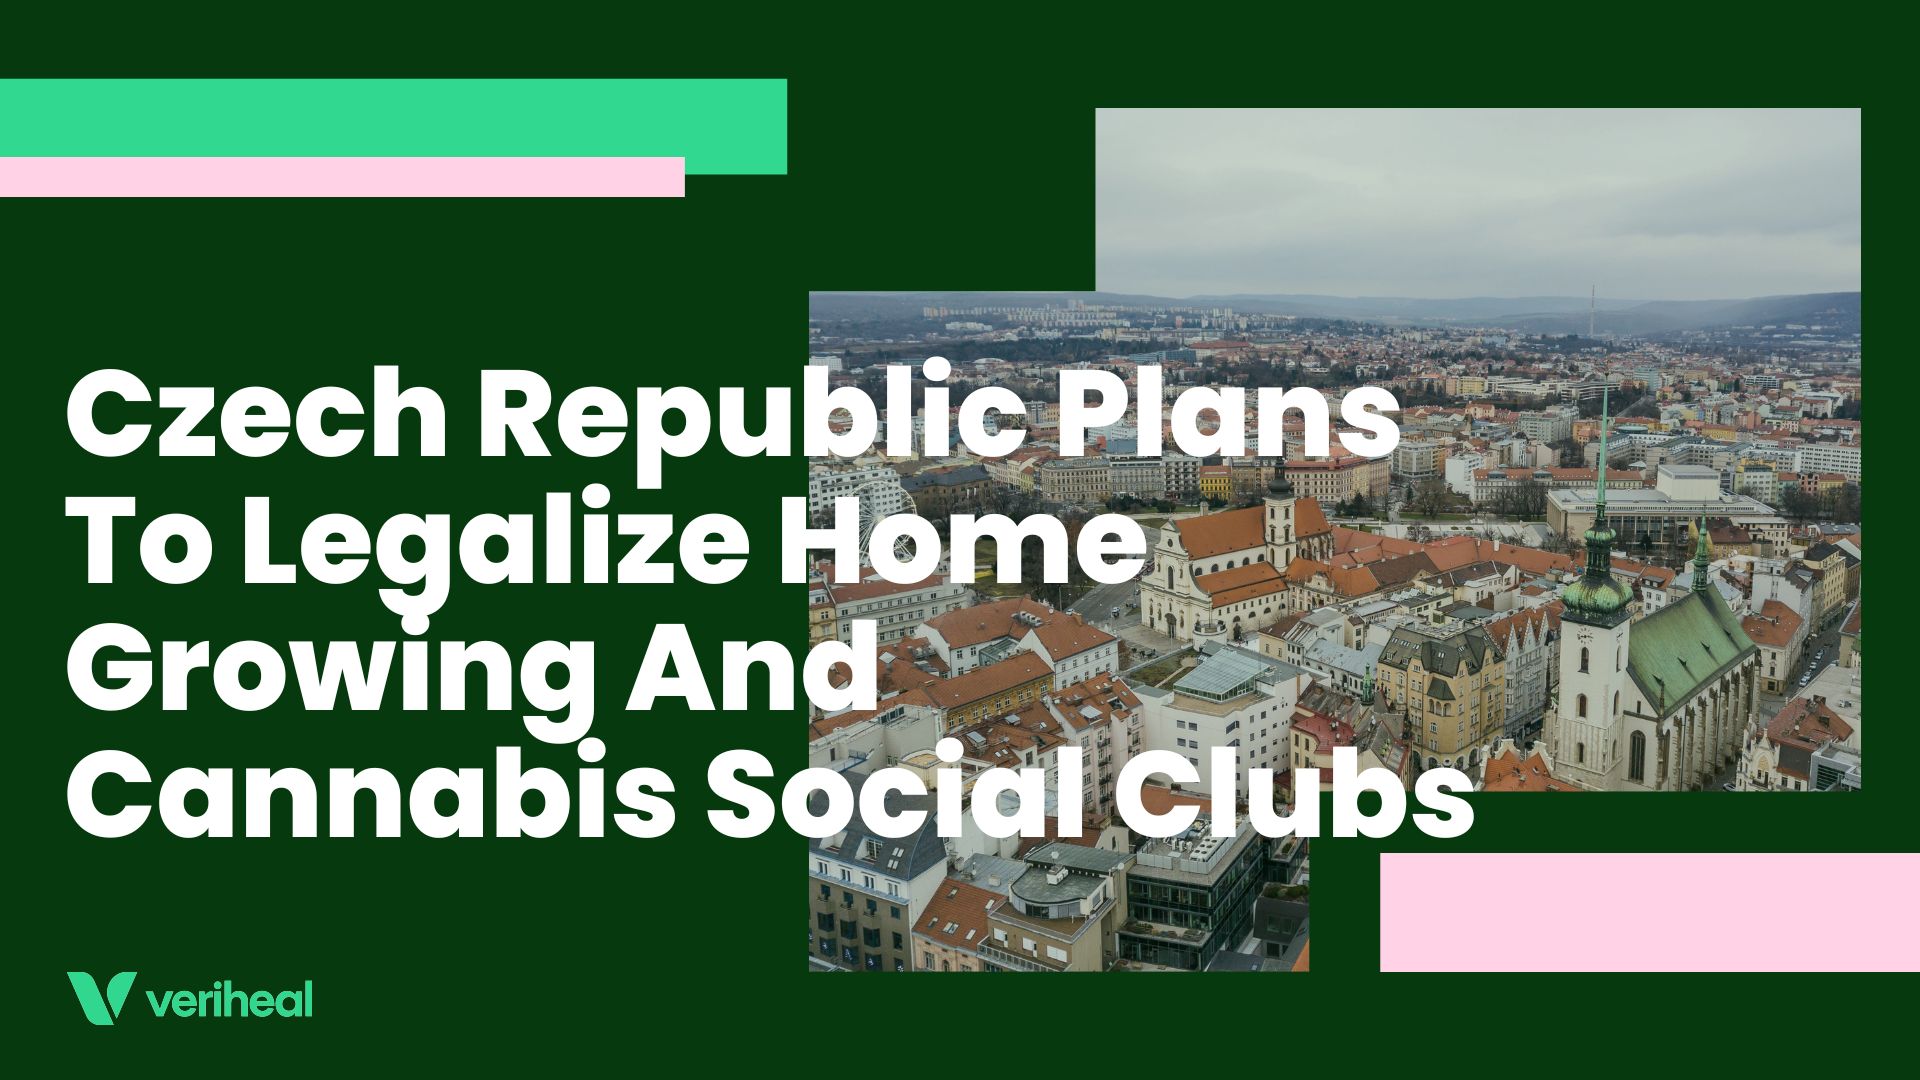 Czech Republic Plans To Legalize Home Growing And Cannabis Social Clubs